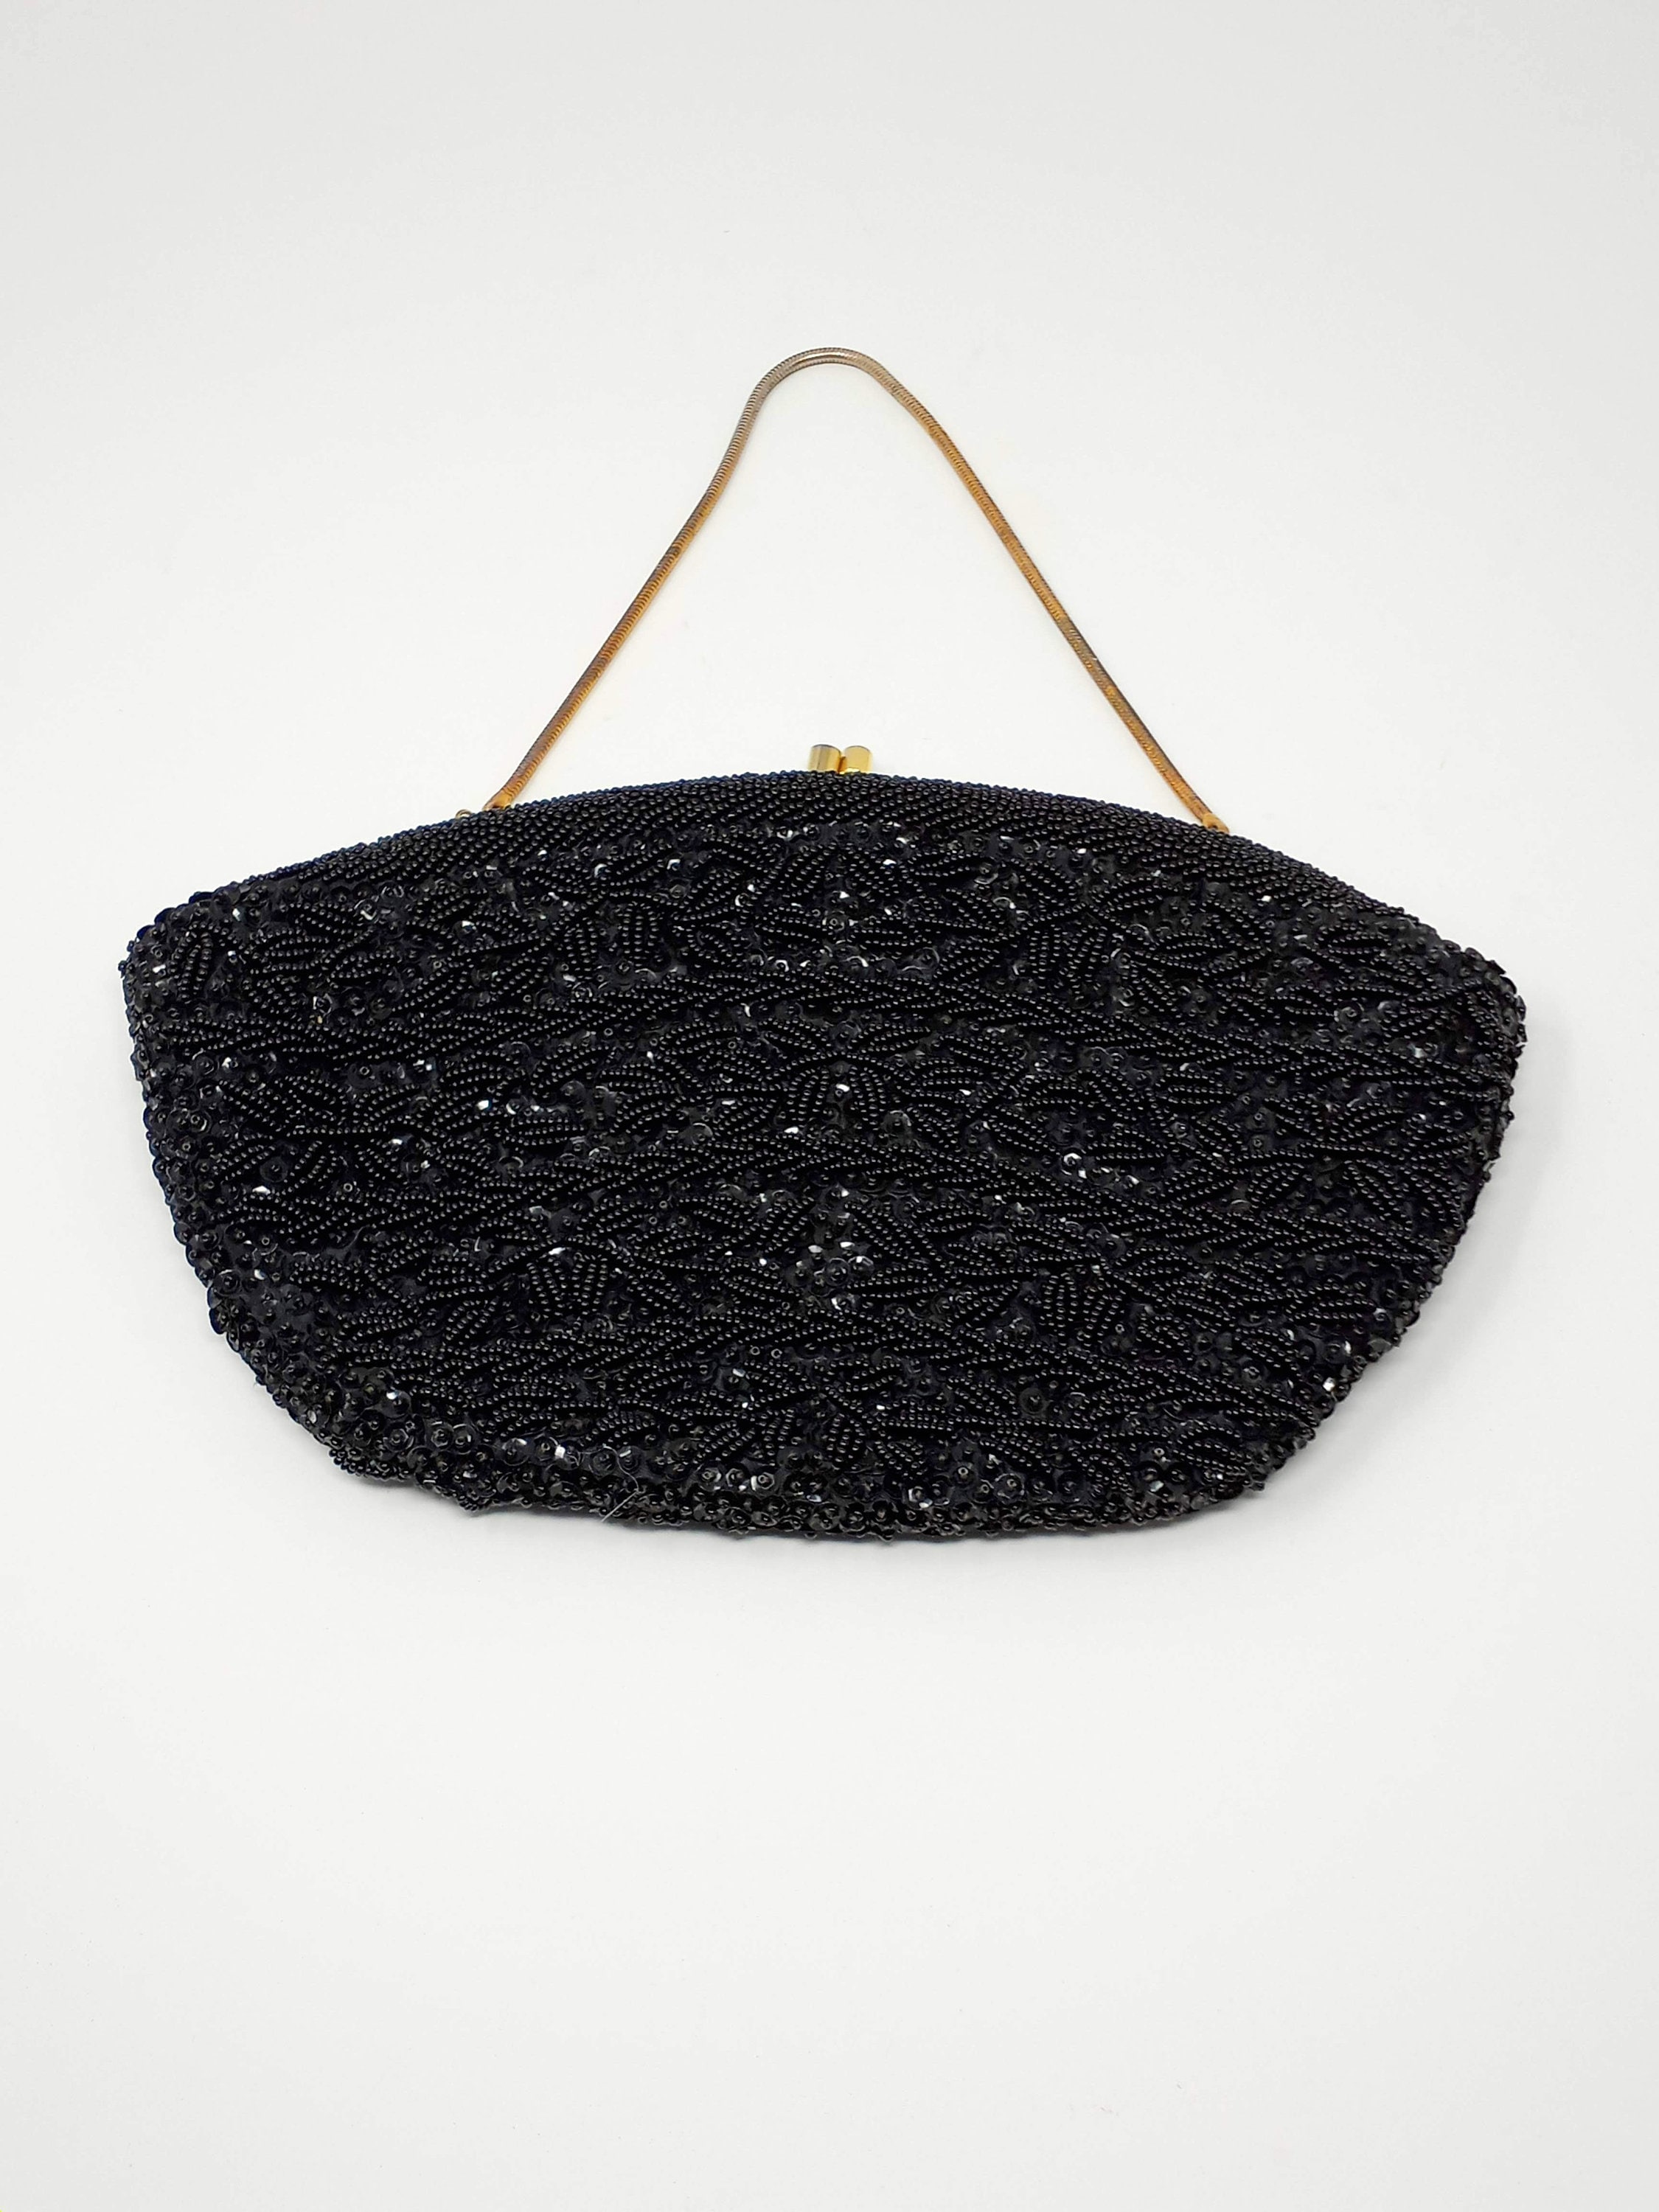 * VINTAGE '60s / '70s GLAMOROUS HAND MADE SPARKLING BLACK BEAD & SEQUIN  EVENING BAG FROM HONG KONG